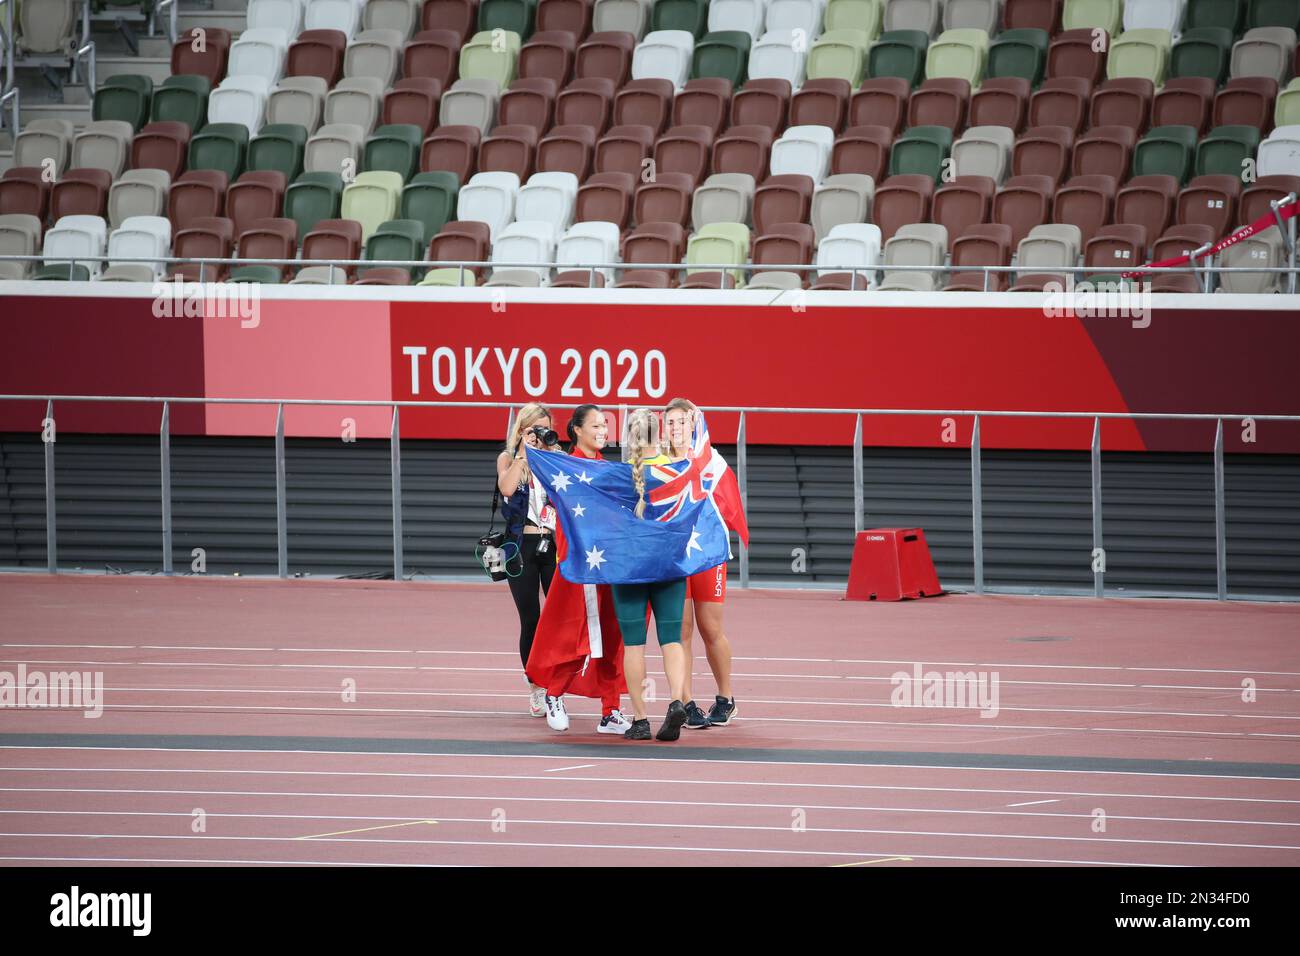 AUG 06, 2021 - Tokyo, Japan: LIU Shiying of China, Maria ANDREJCZYK of Poland and Kelsee-Lee BARBER of Australia win the gold, silver and bronze medal Stock Photo